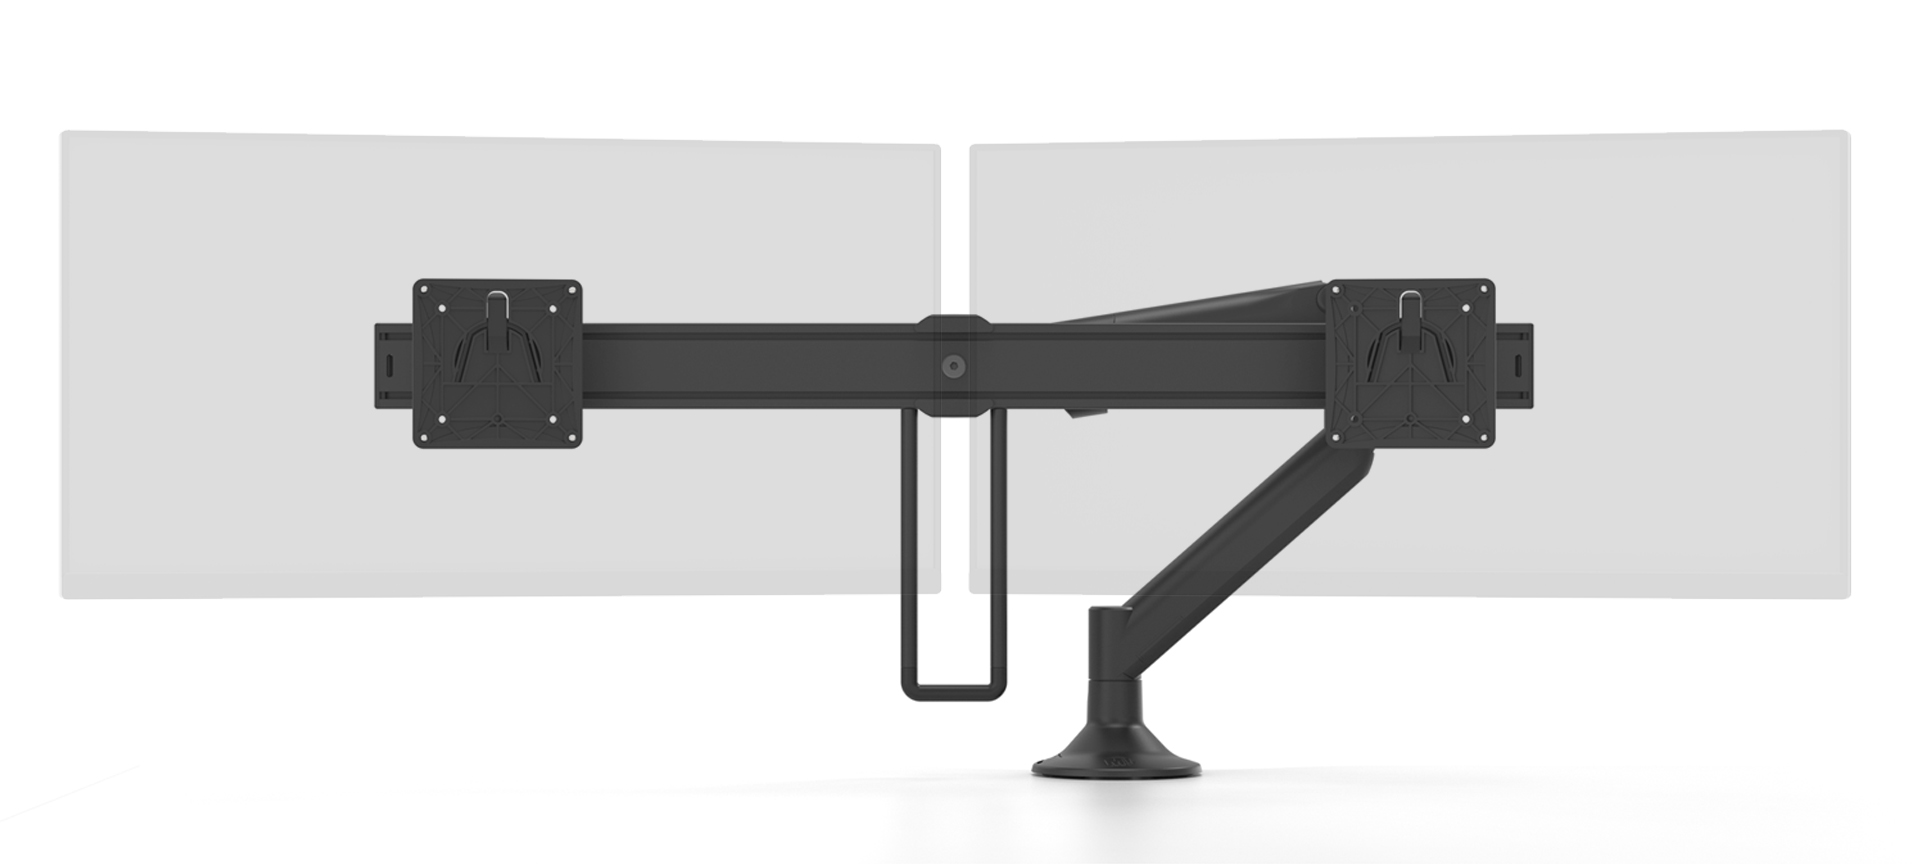 Metalicon Levo dynamic monitor arm with dual screen mount